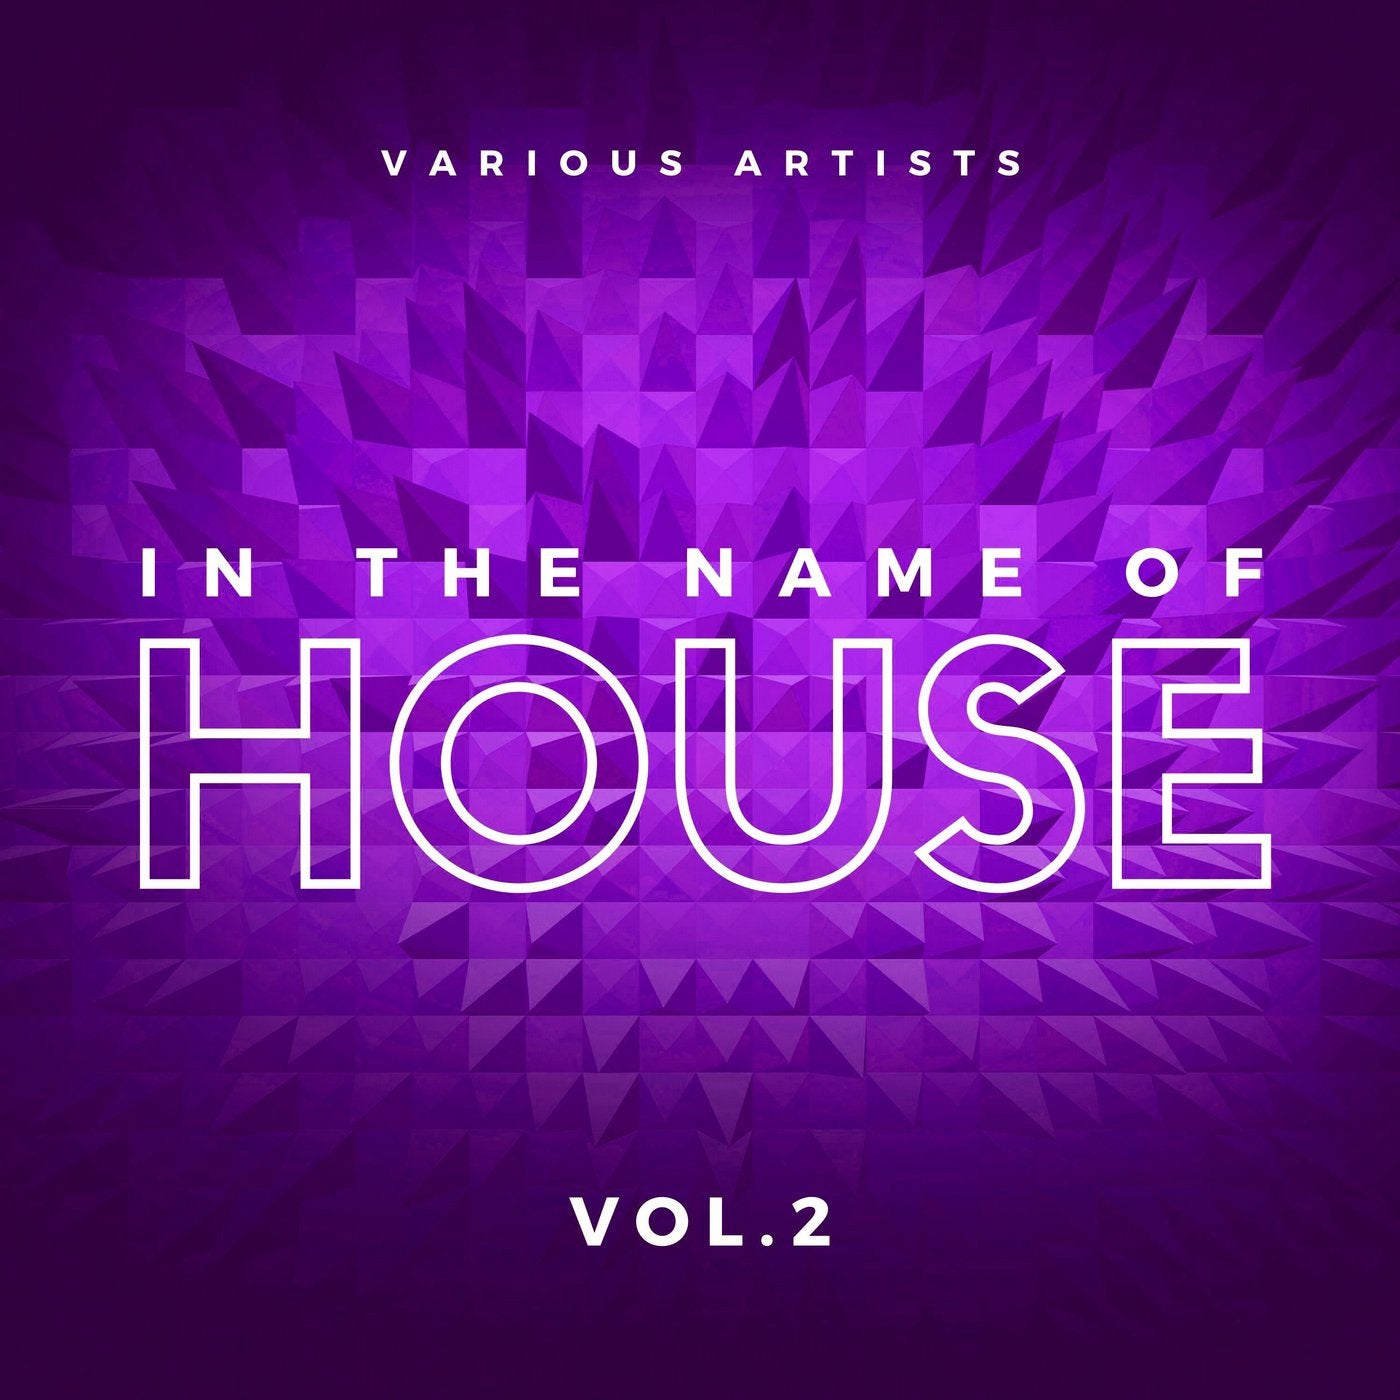 In the Name of House, Vol. 2